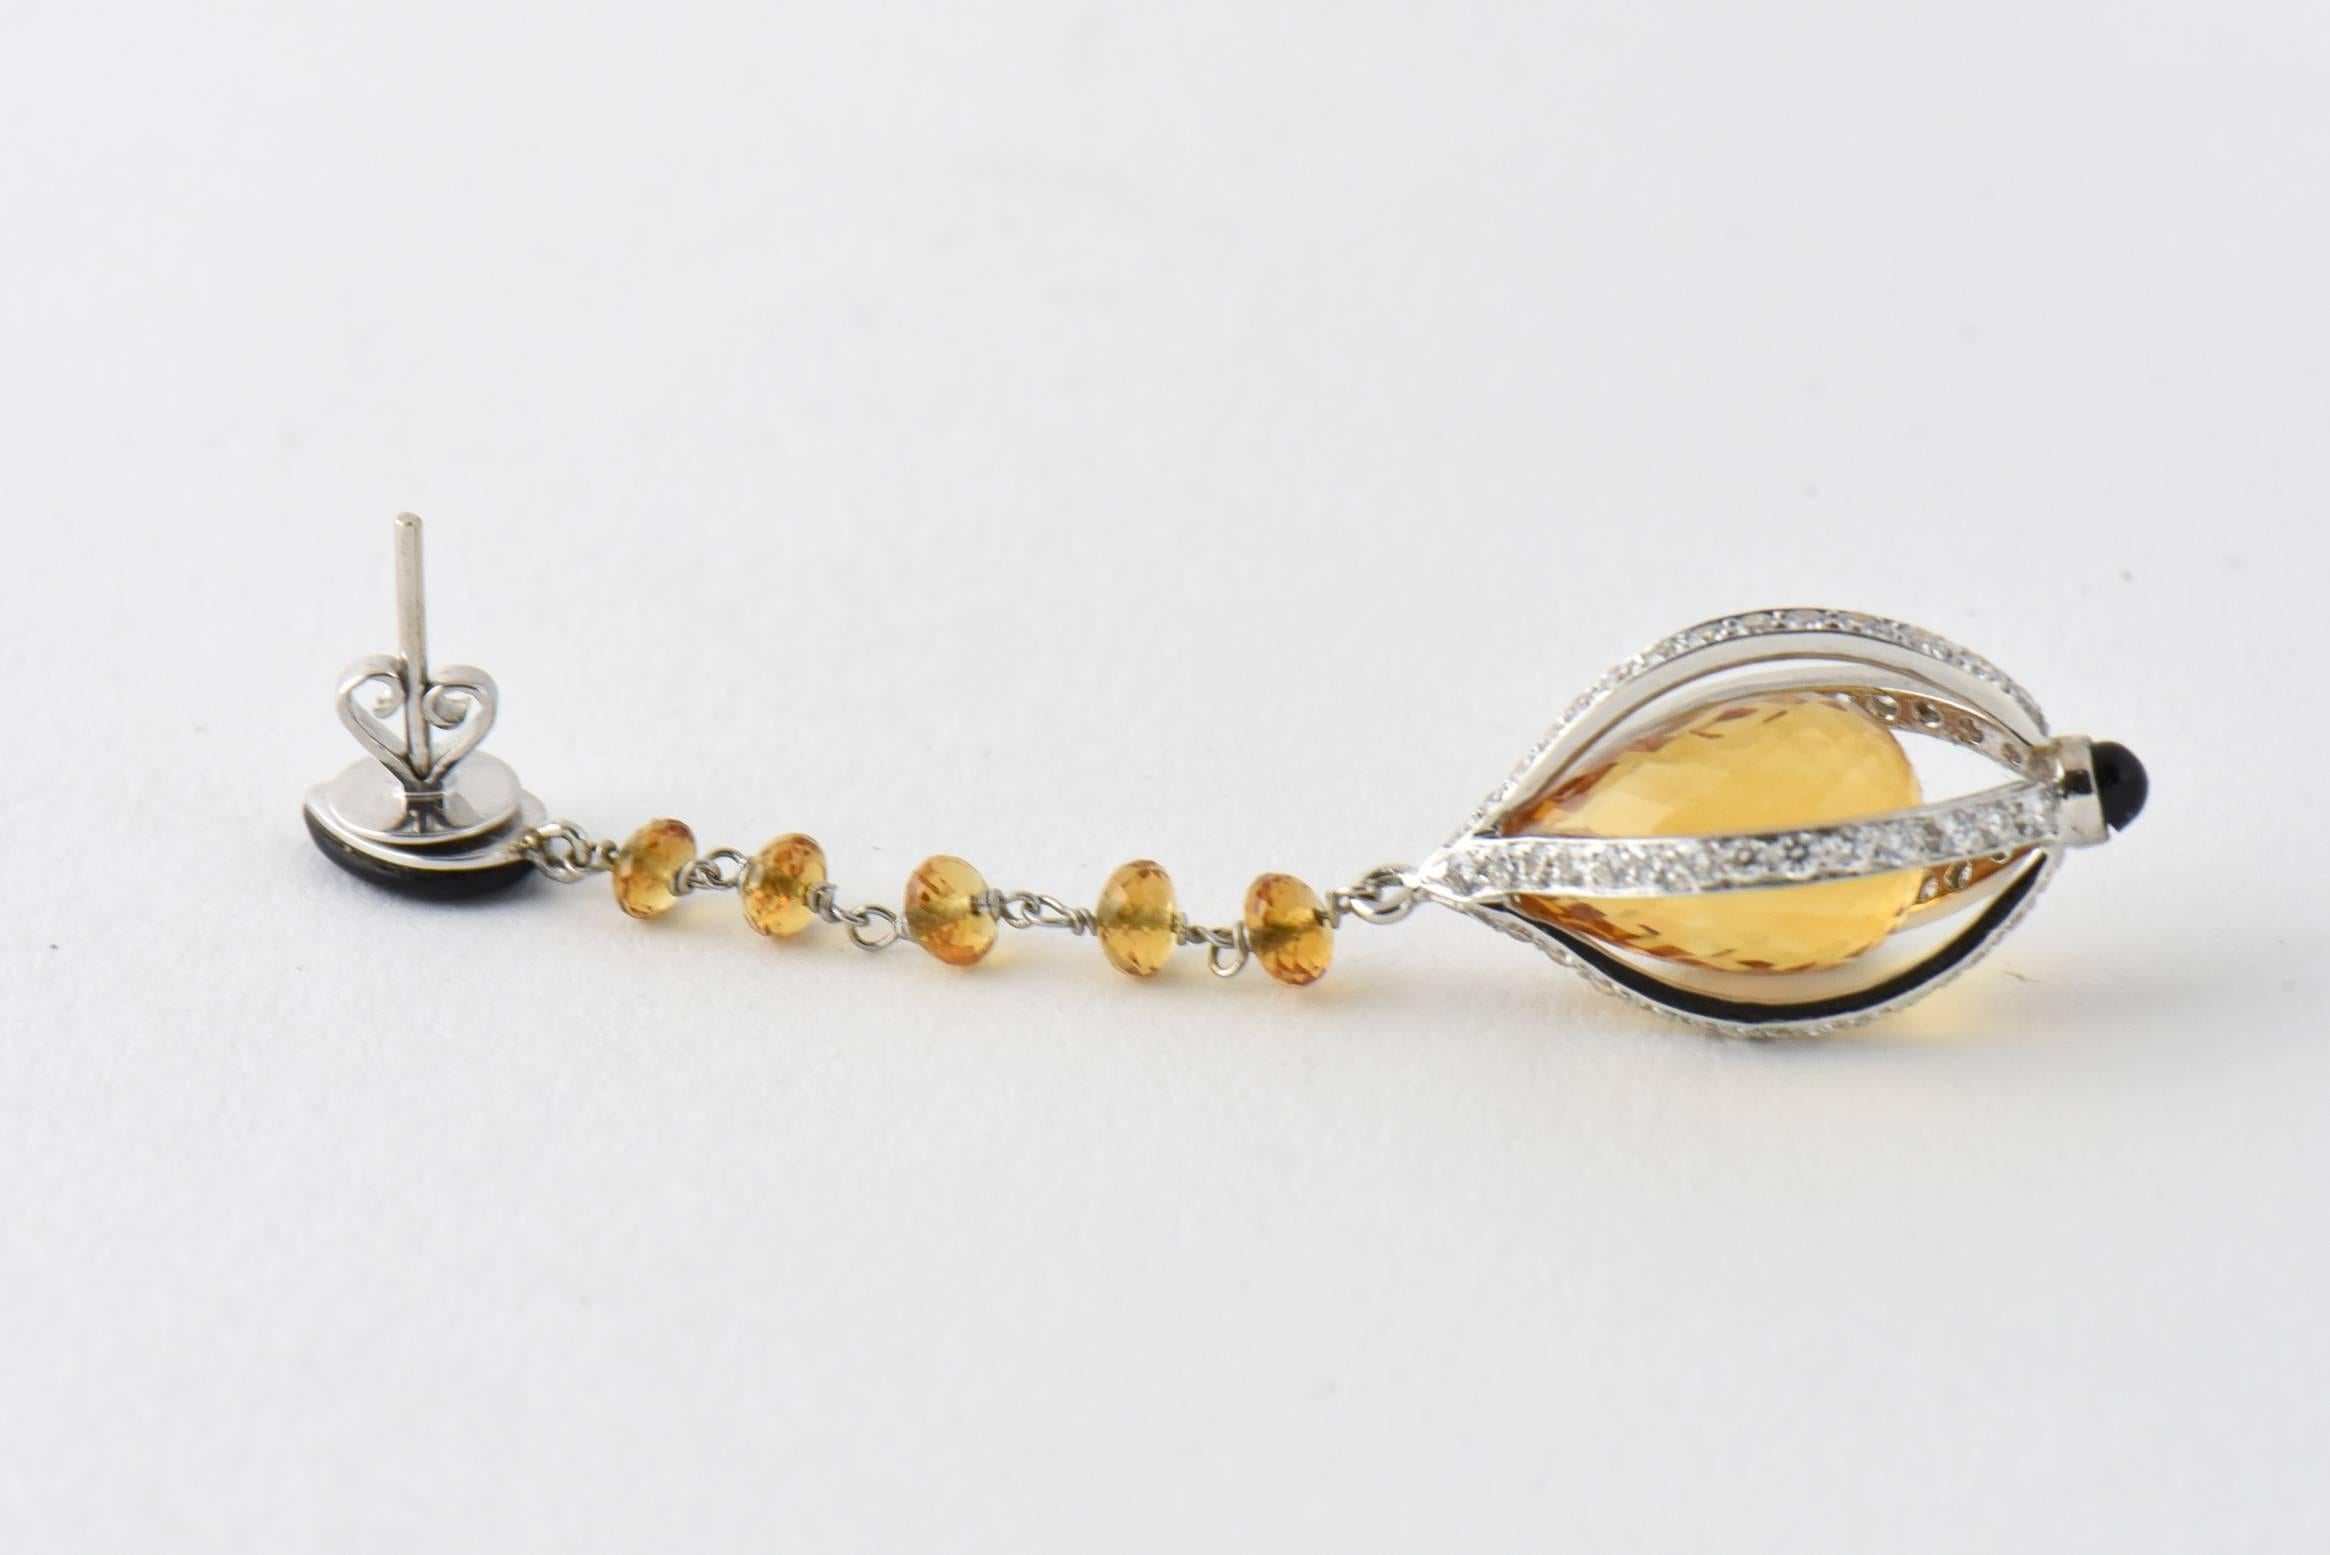 Very long earrings featuring a teardrop diamond and onyx top section with a facetted citrine & white gold chain extending to a citrine briolette in a diamond & 18k white gold cage with a onyx tip.